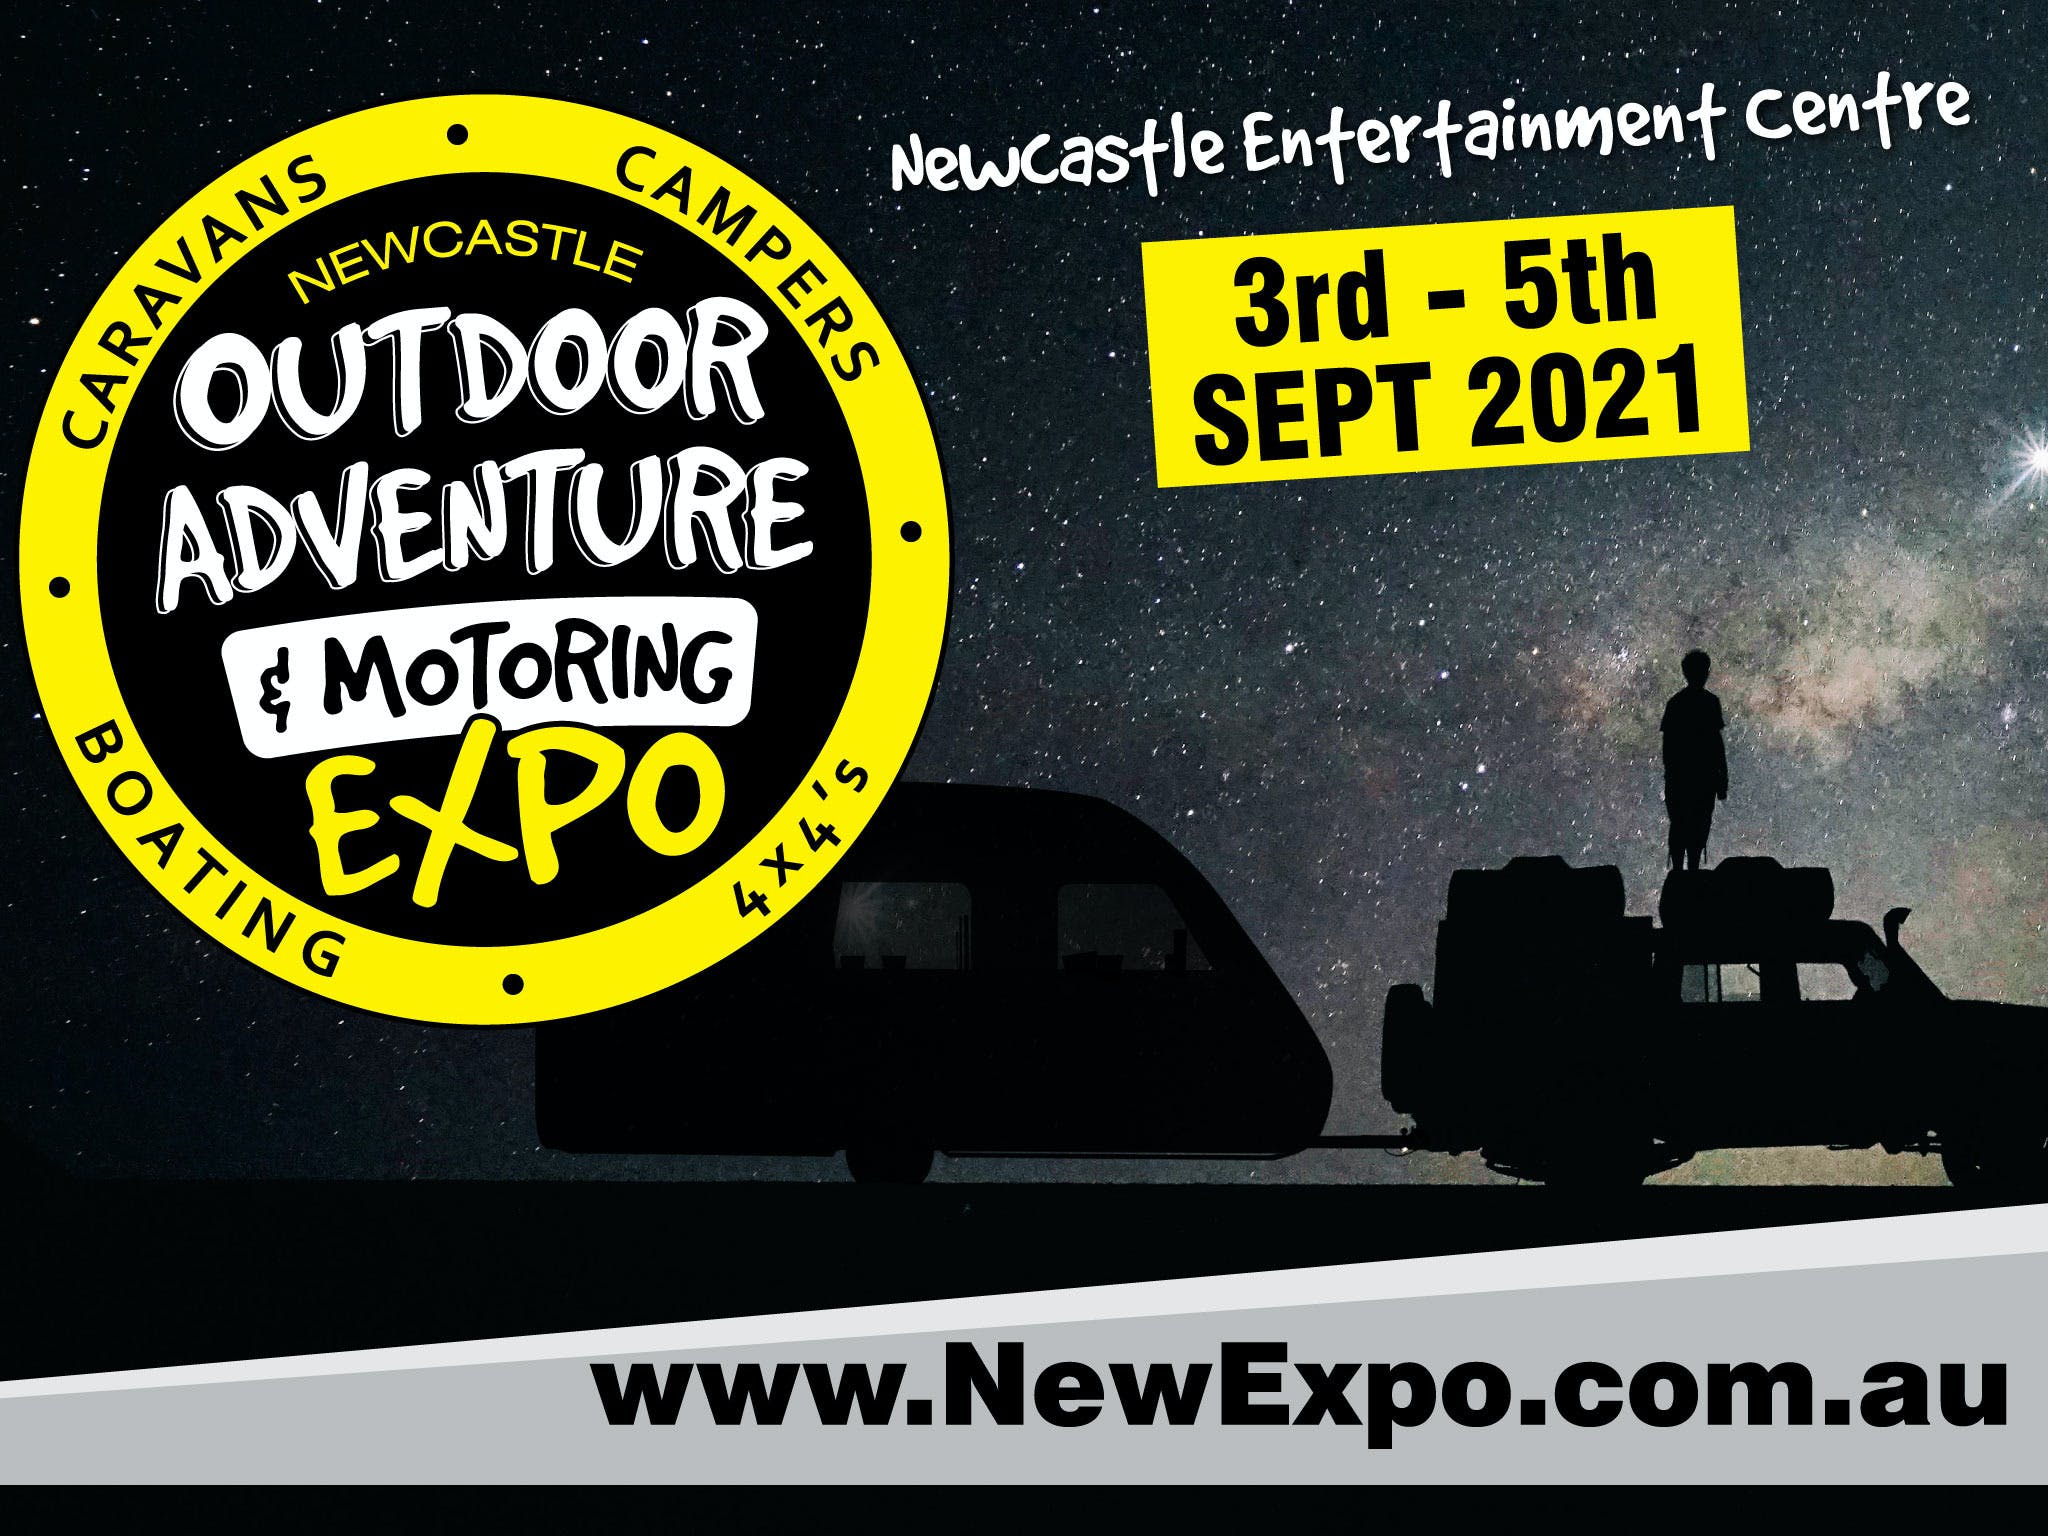 Newcastle Outdoor Adventure and Motoring Expo - Pubs Sydney